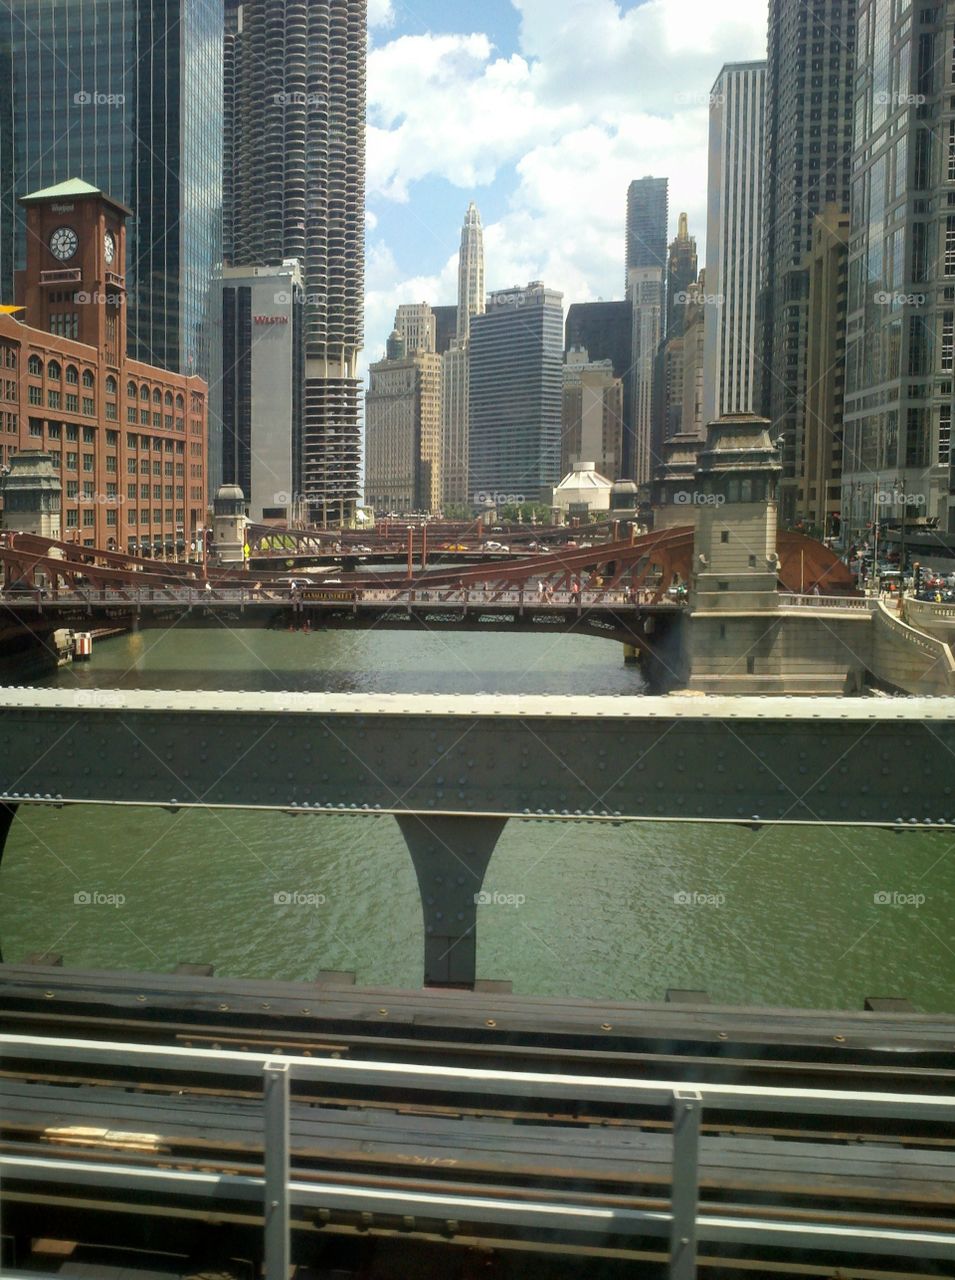 Chicagoland from the L train.